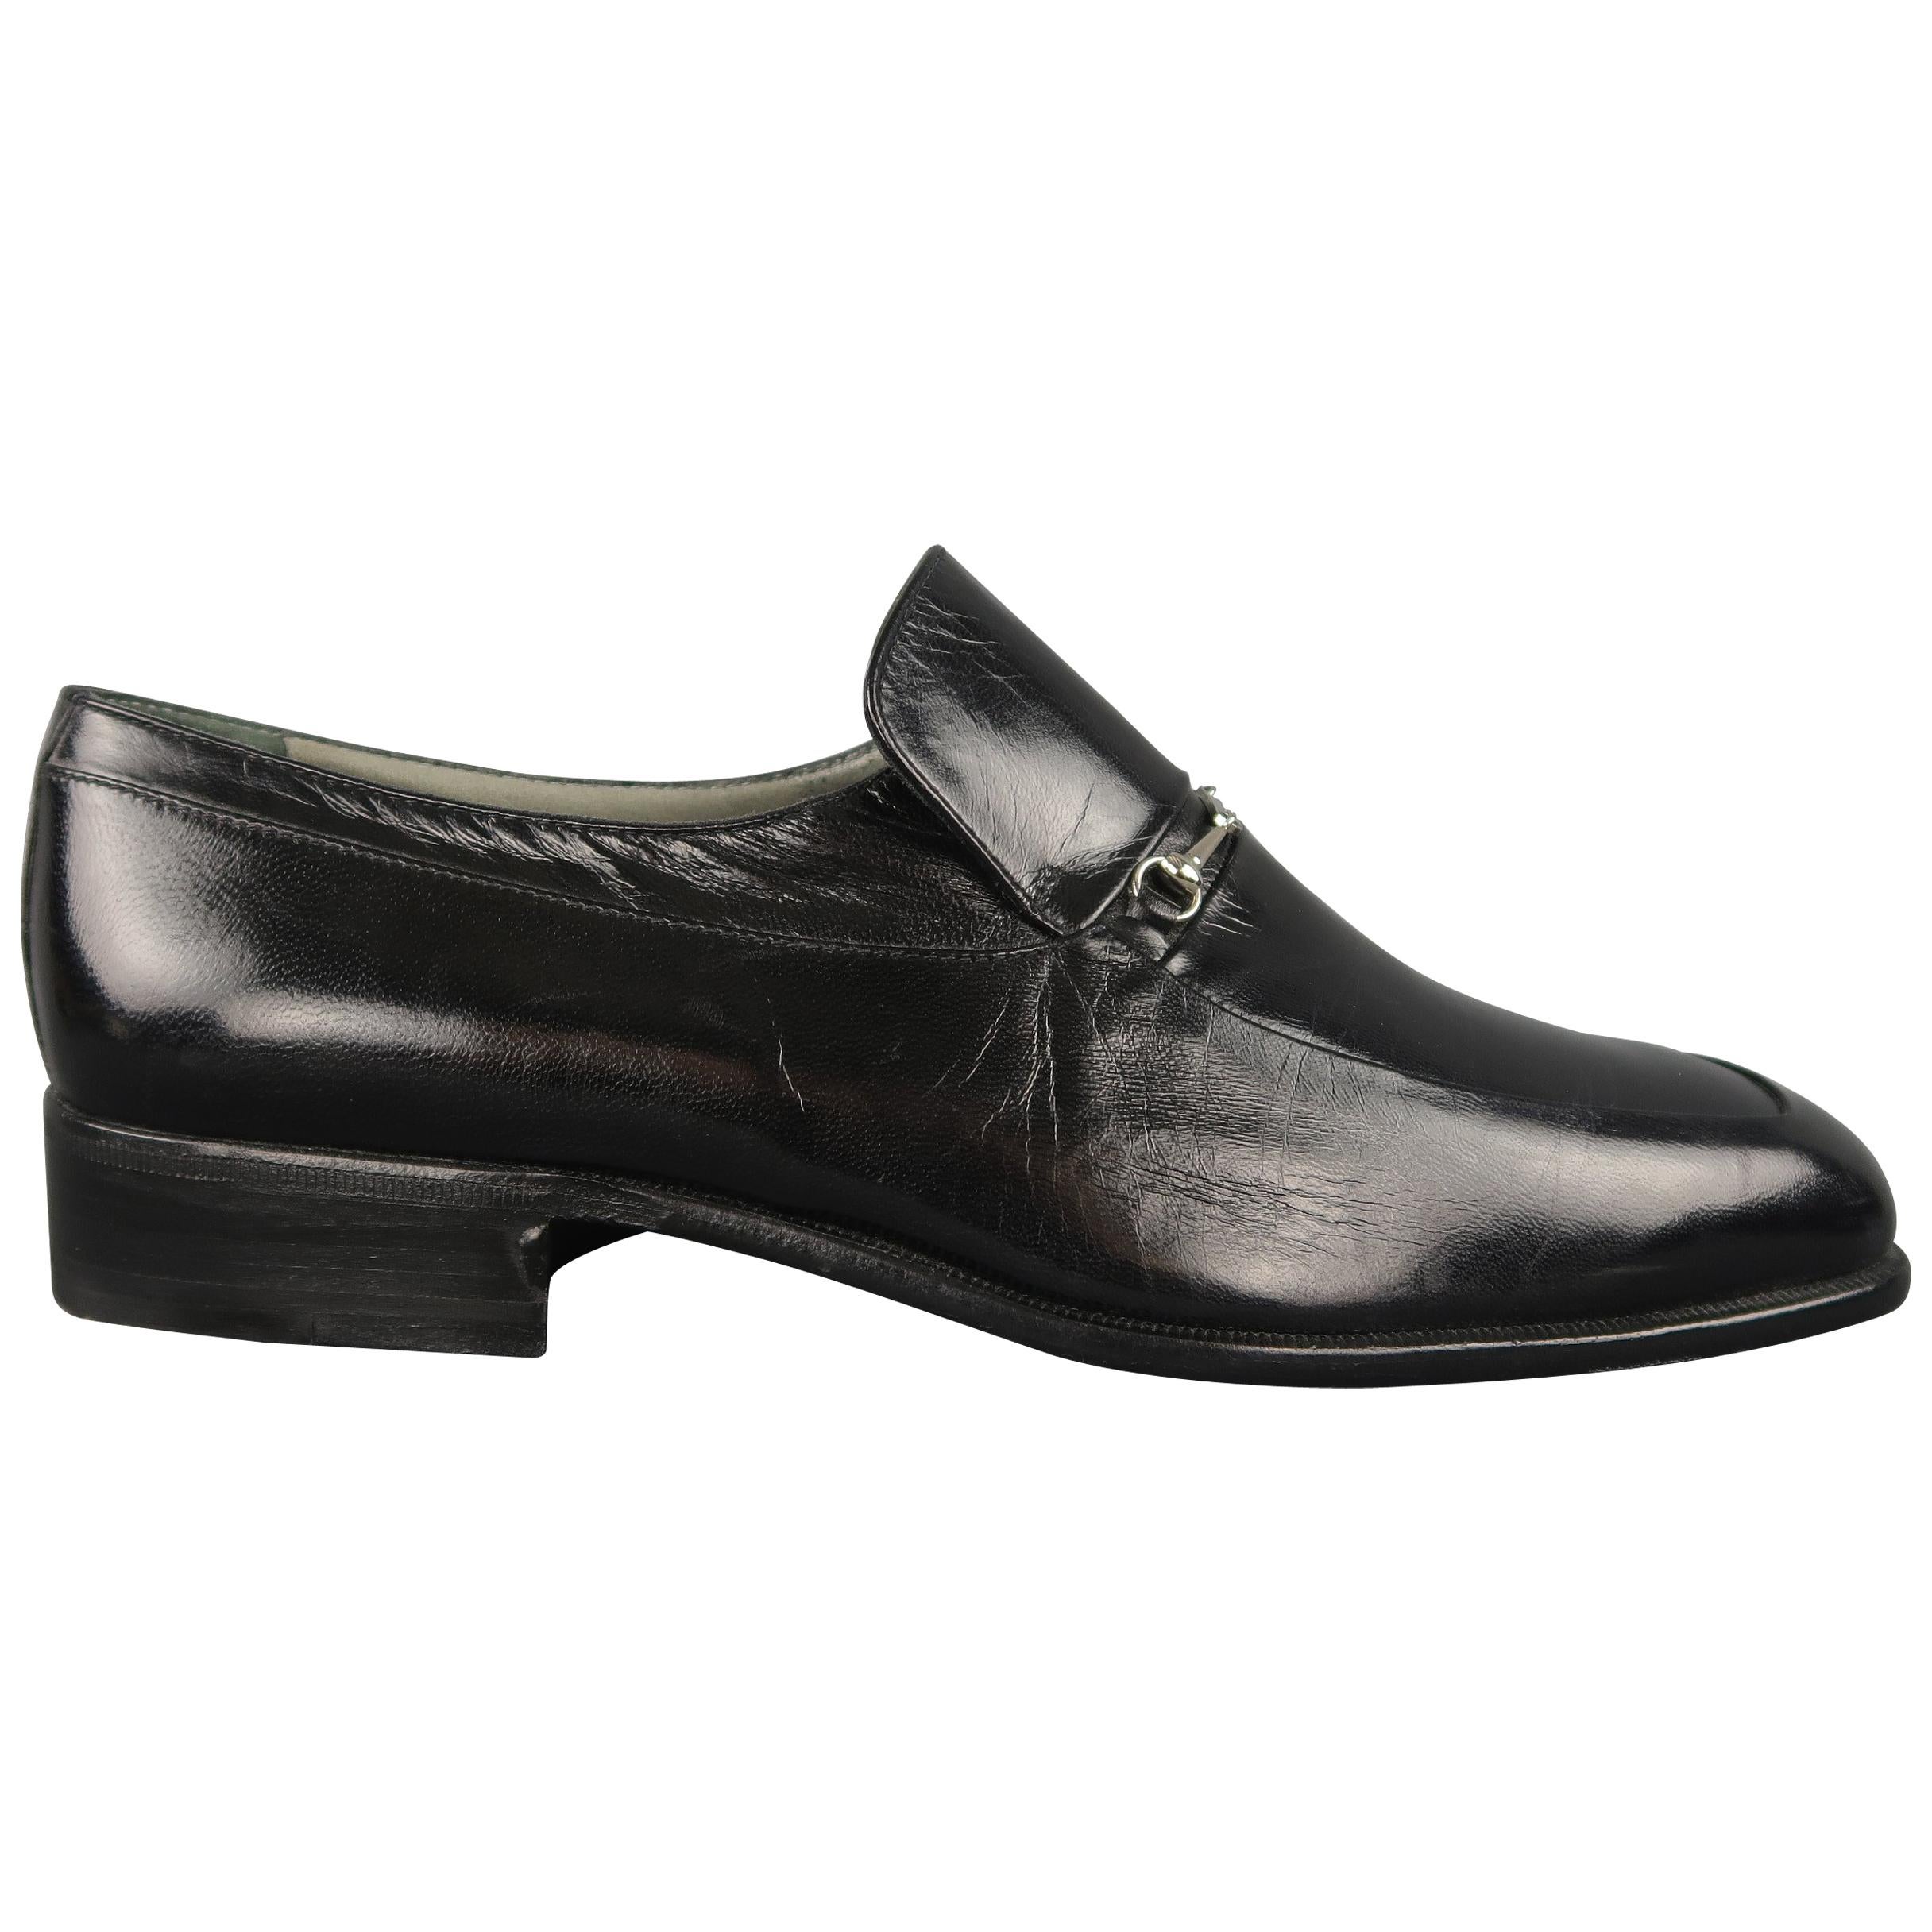 Moreschi Dress shoes - Black Leather Apron Toe Silver Hardware Loafers